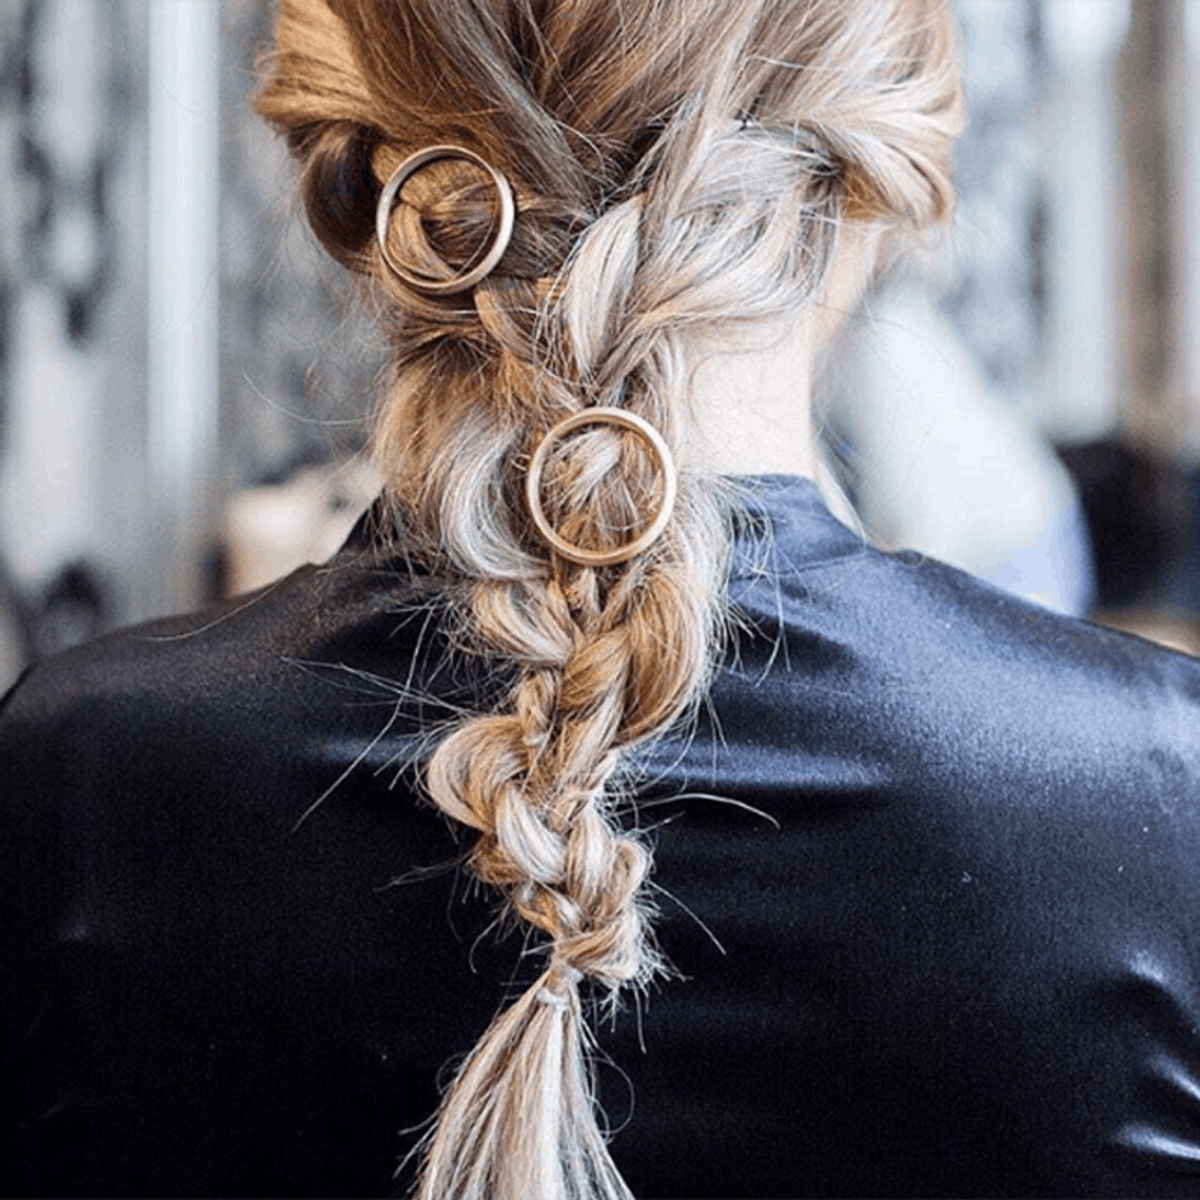 Metallic Hair Jewelry Is the Glamorous New Trend We’re Obsessed With